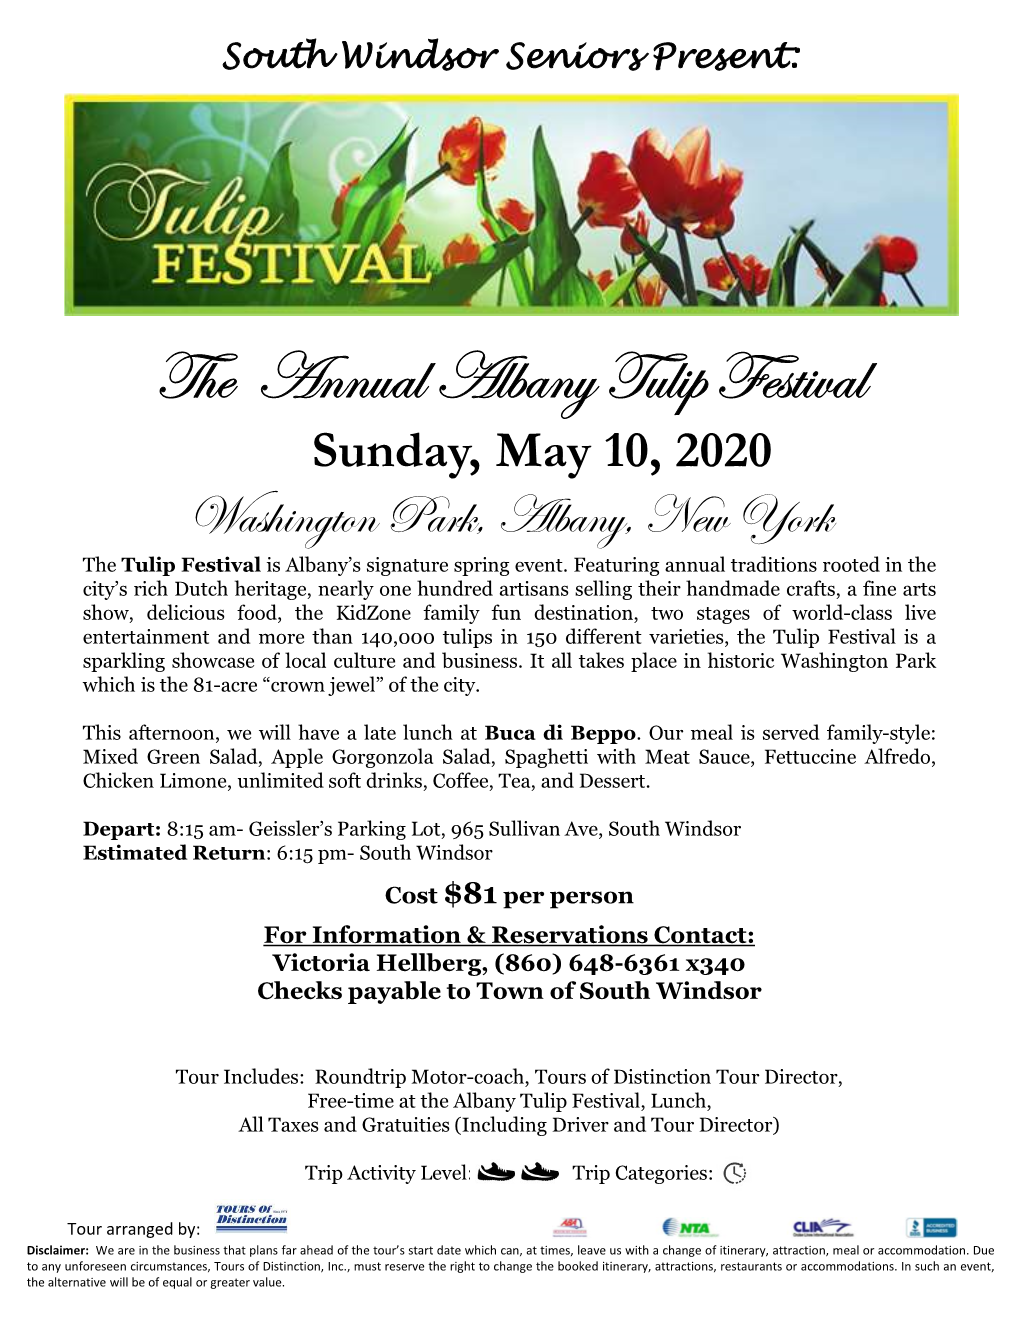 The Annual Albany Tulip Festival Sunday, May 10, 2020 Washington Park, Albany, New York the Tulip Festival Is Albany’S Signature Spring Event